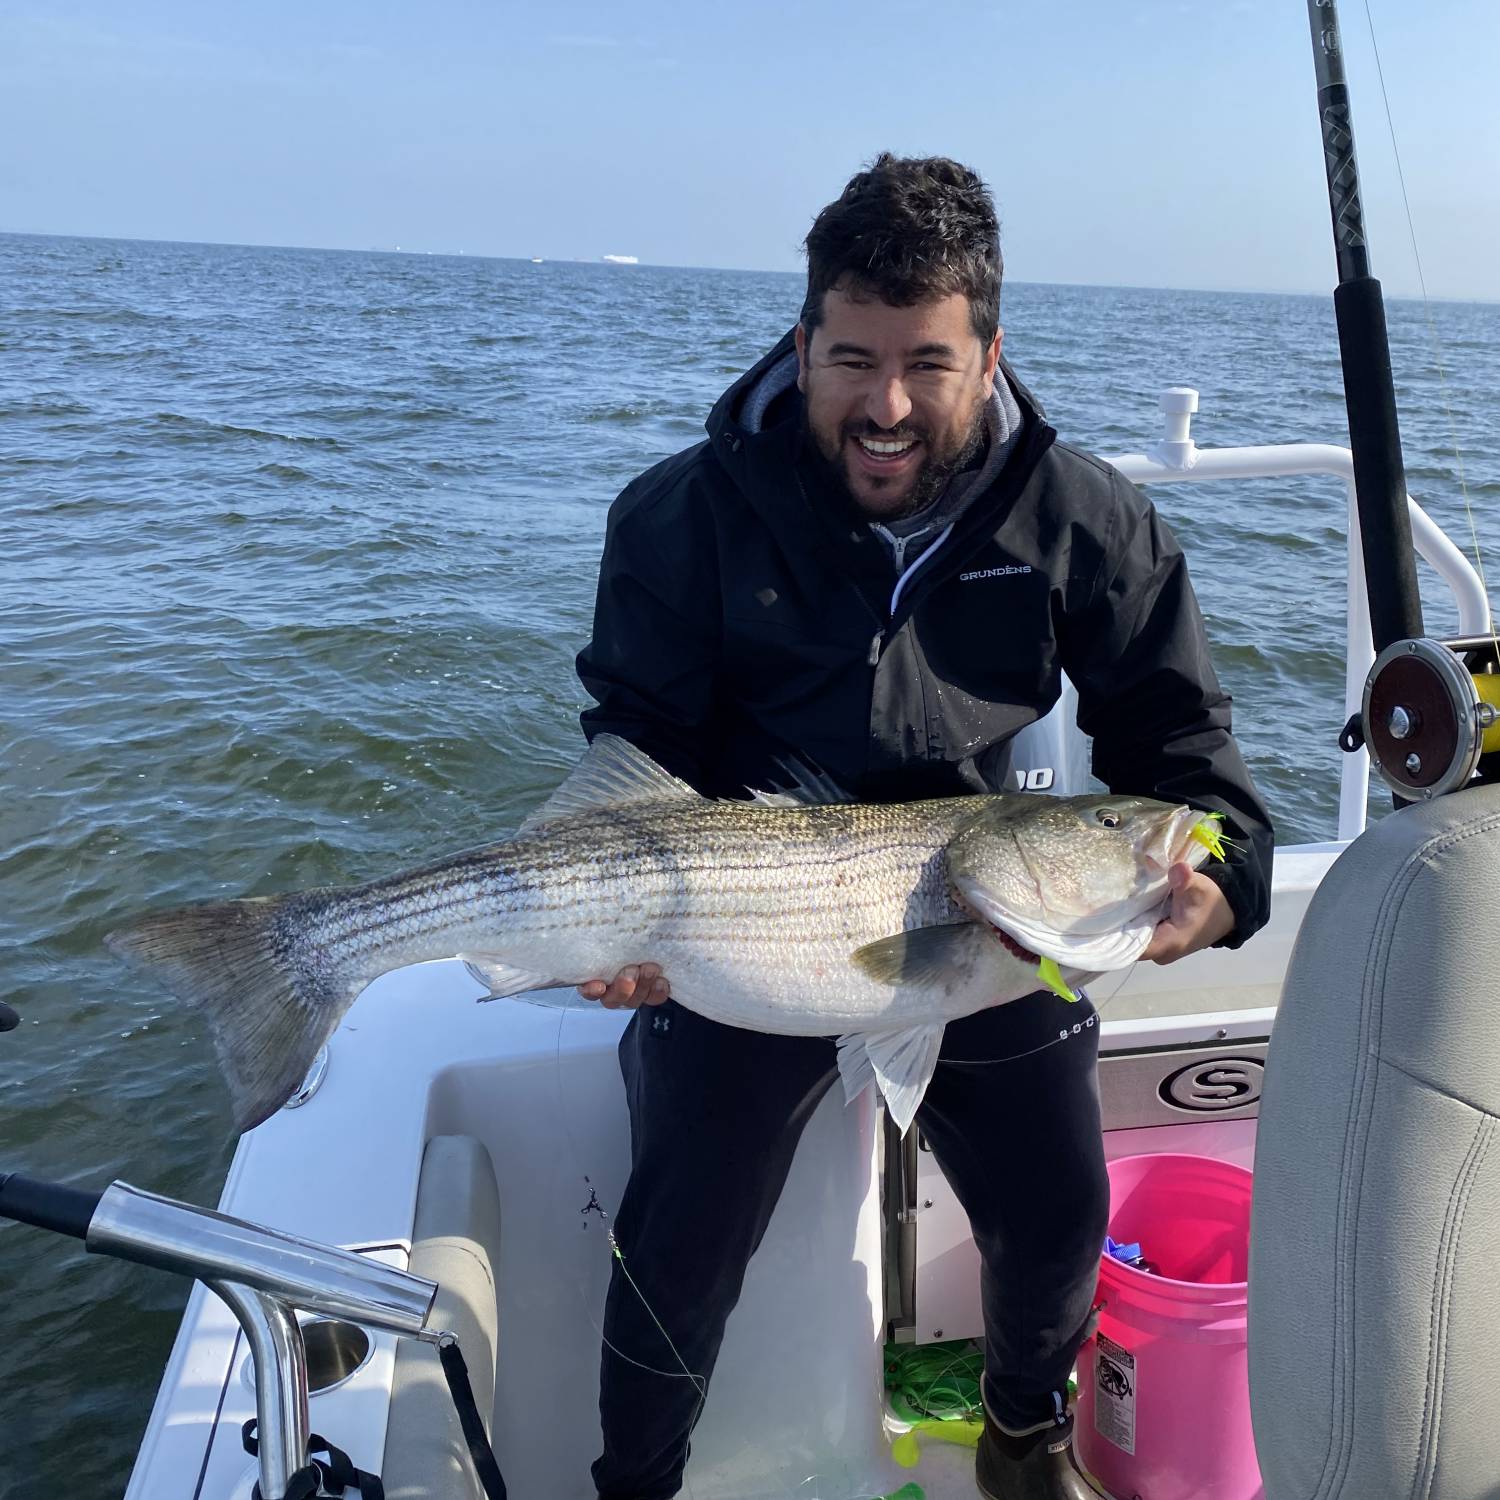 After one year of research and practice, we finally caught a trophy rockfish. The rockfish, als...